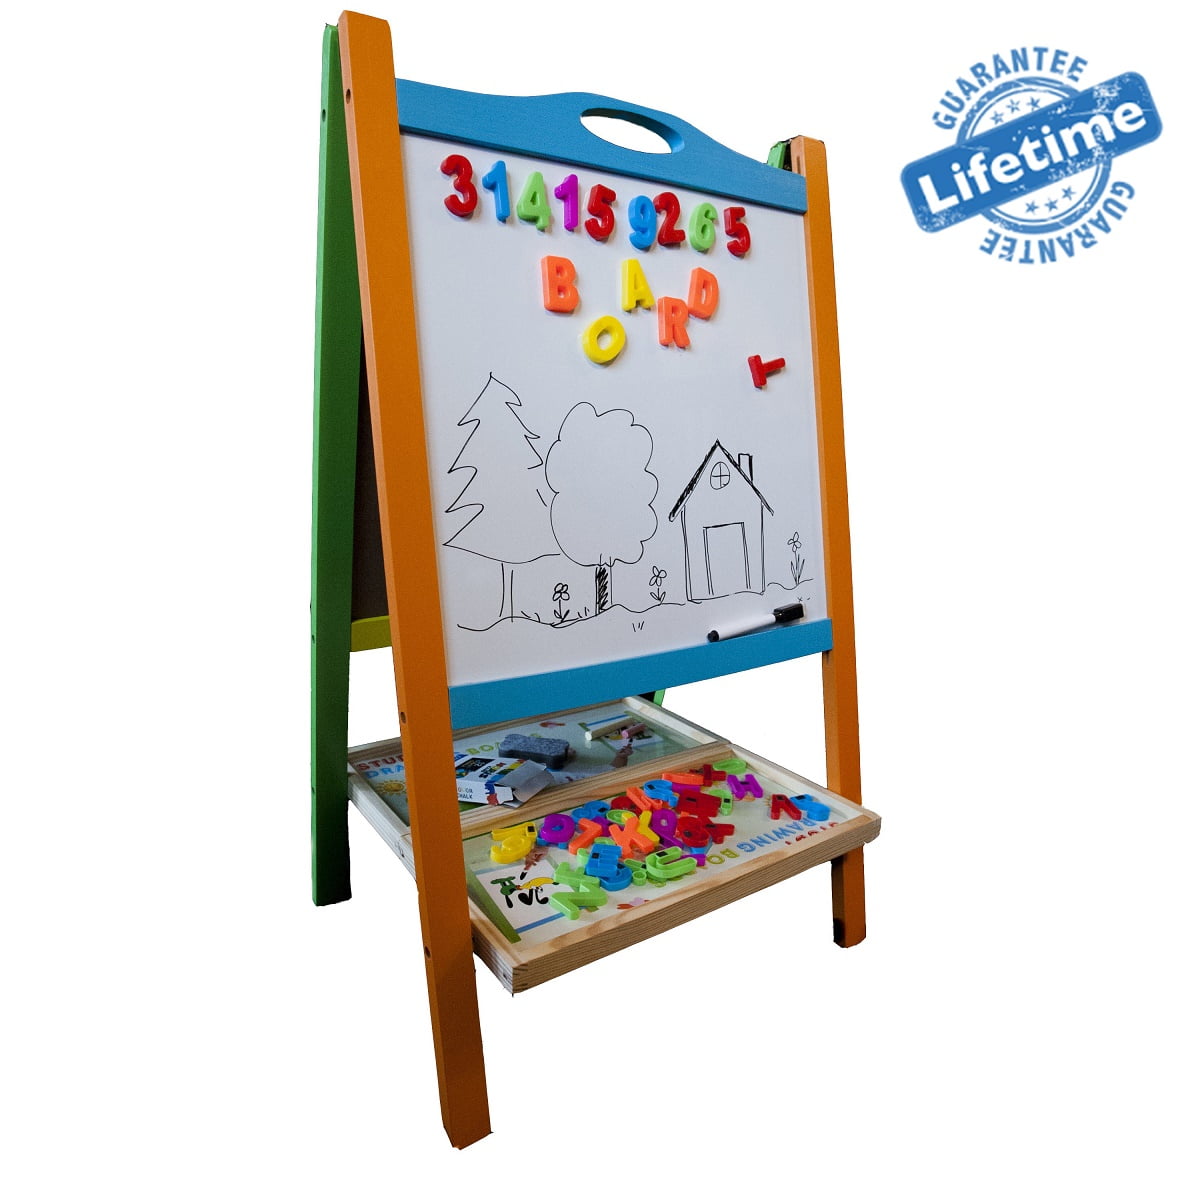 Wooden Art Easel Double-Sided Whiteboard /& Chalkboard Adjustable Standing Easel with Paper Roll Holder,Letters,Numbers Magnets and Other Accessories for Kids